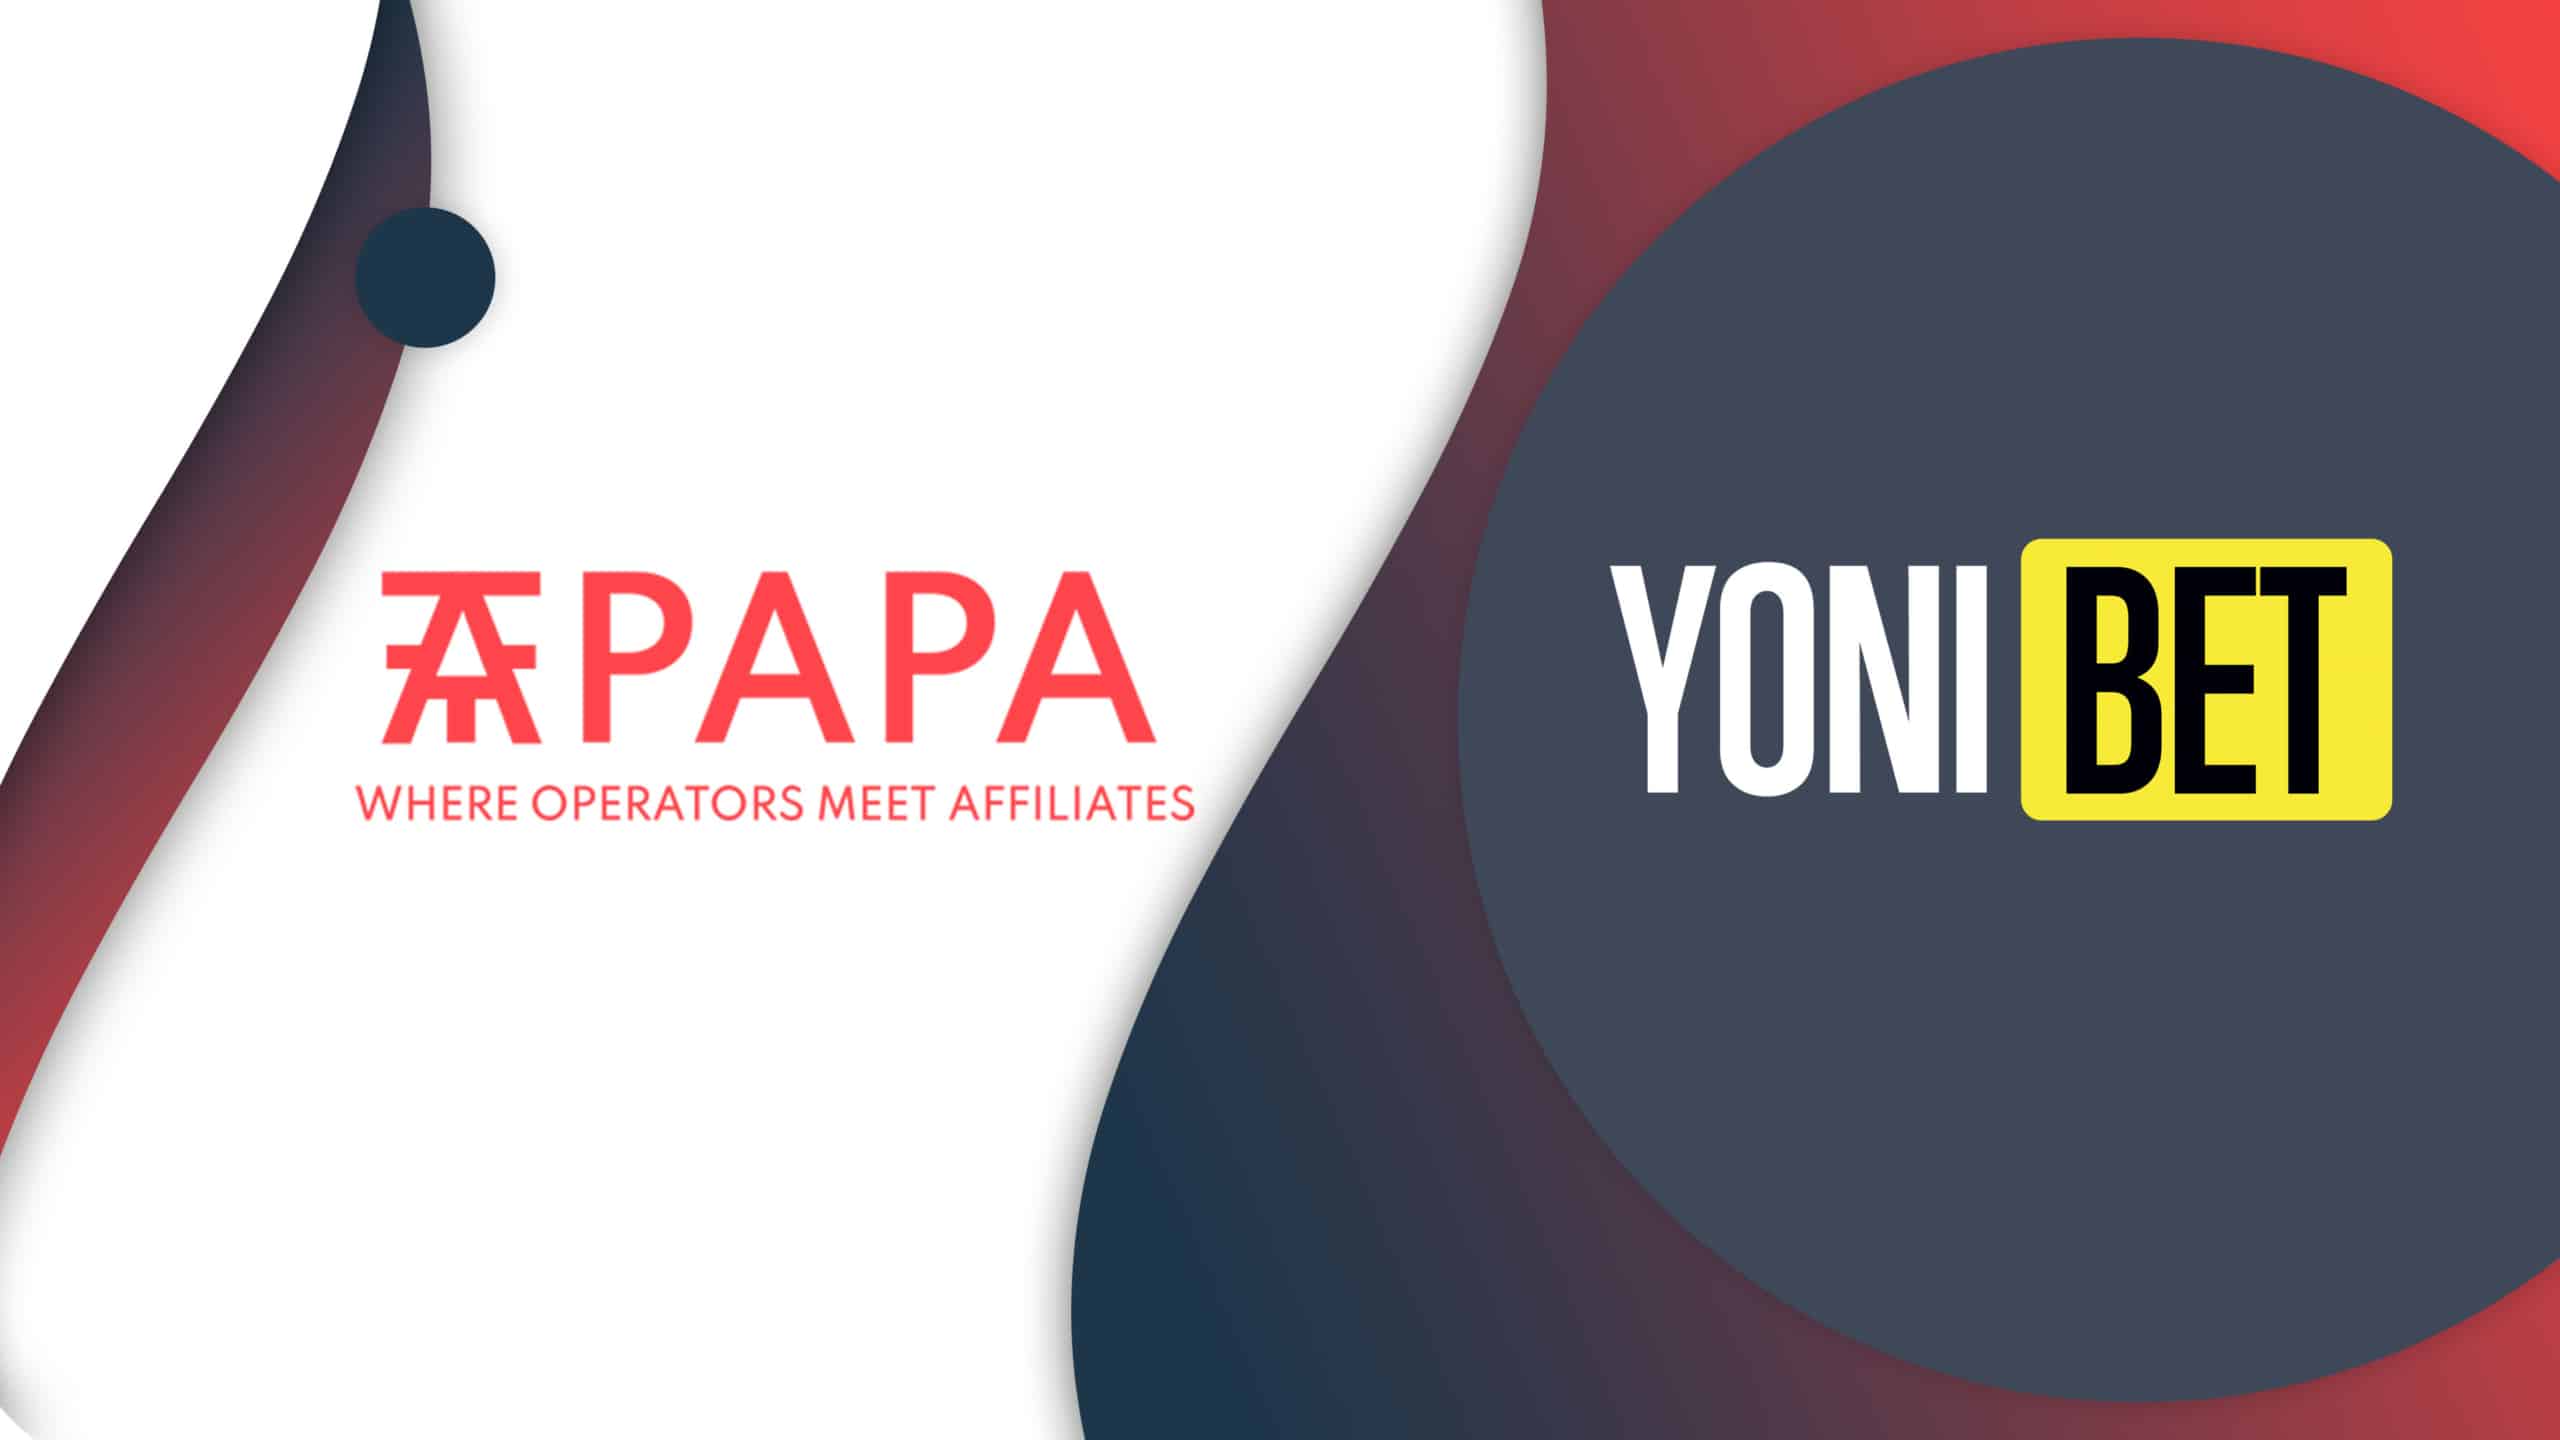 AffPapa lifts the drapes revealing new partnership with YoniBet  